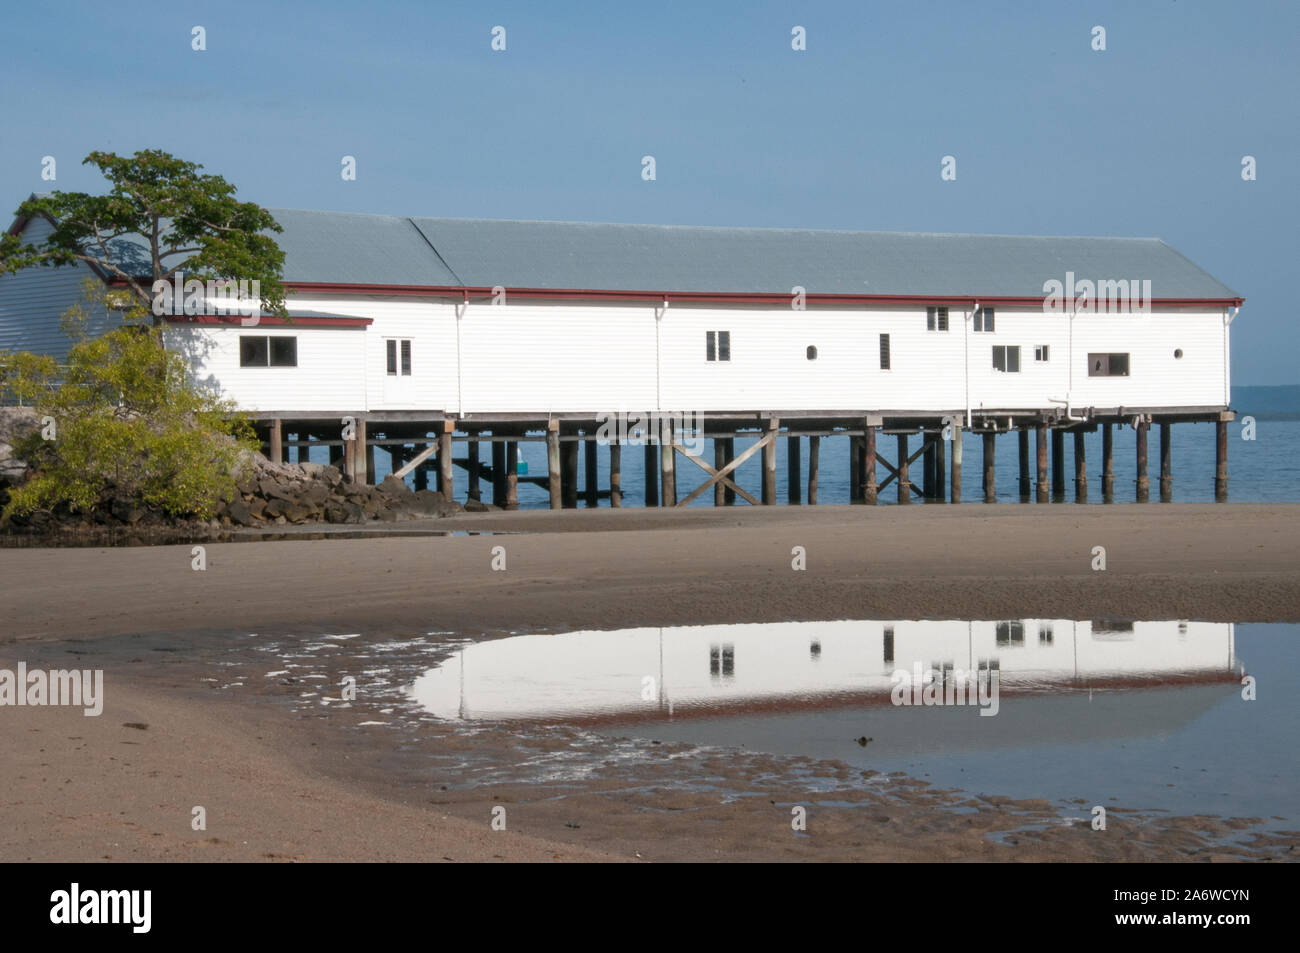 The Old Sugar Wharf at Port Douglas, now an upscale tourist destination in tropical North Queensland, Australia Stock Photo